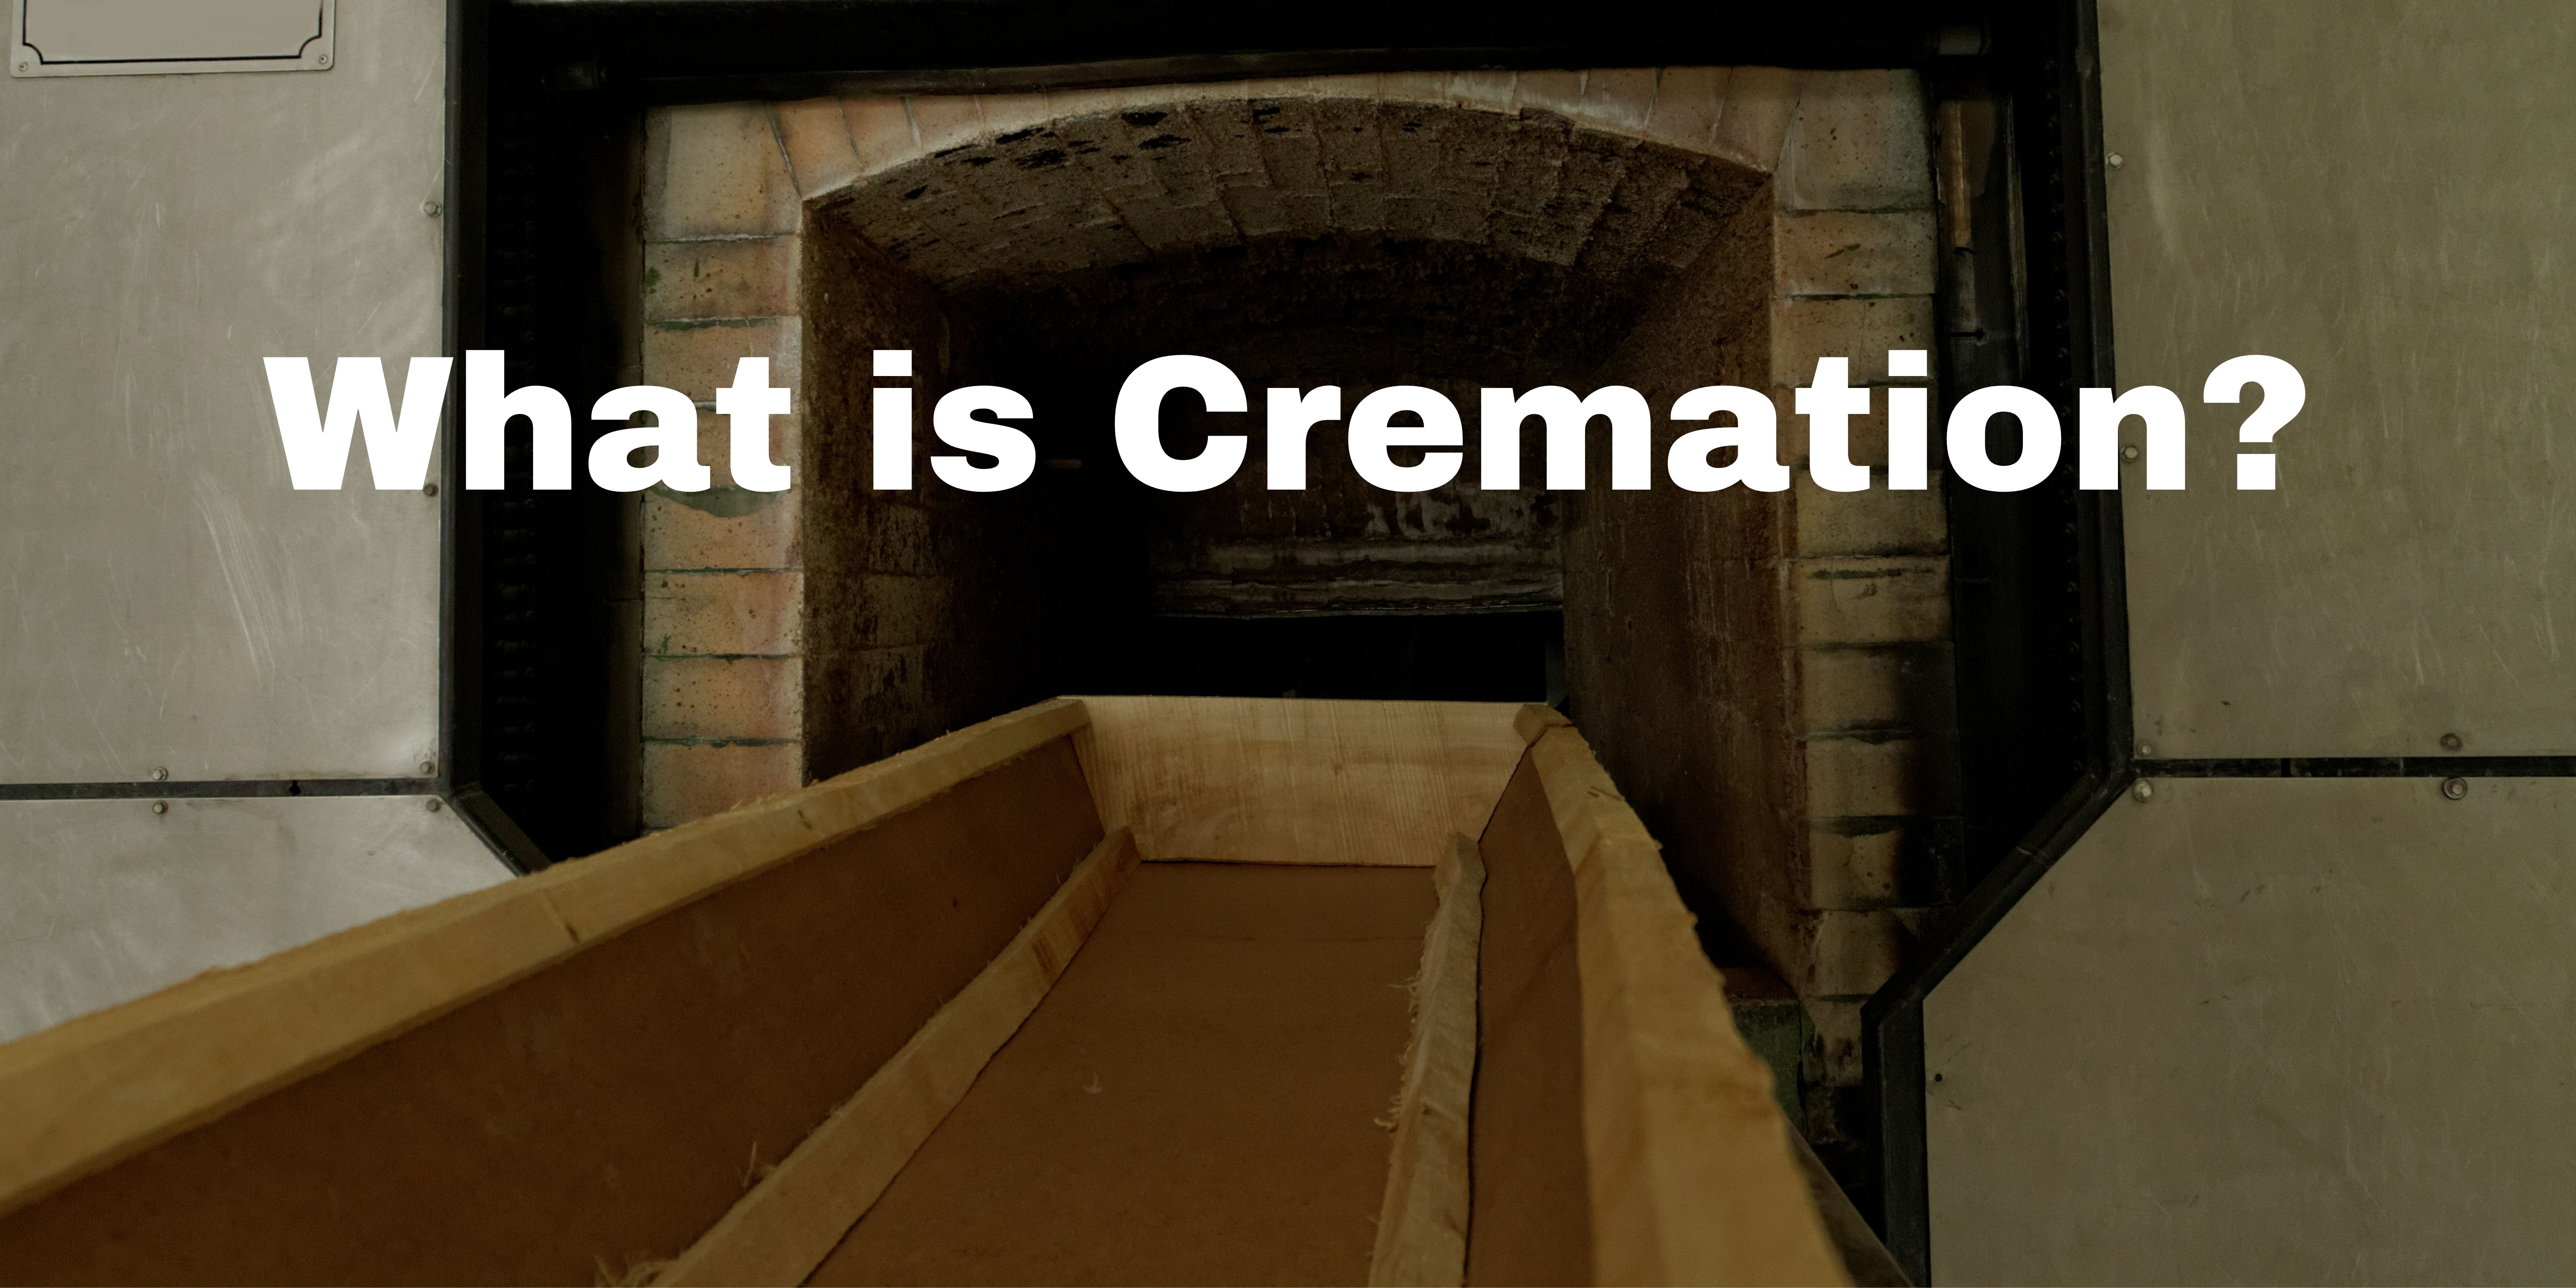 Crematory oven with cremation casket outside of it. "What is cremation?"